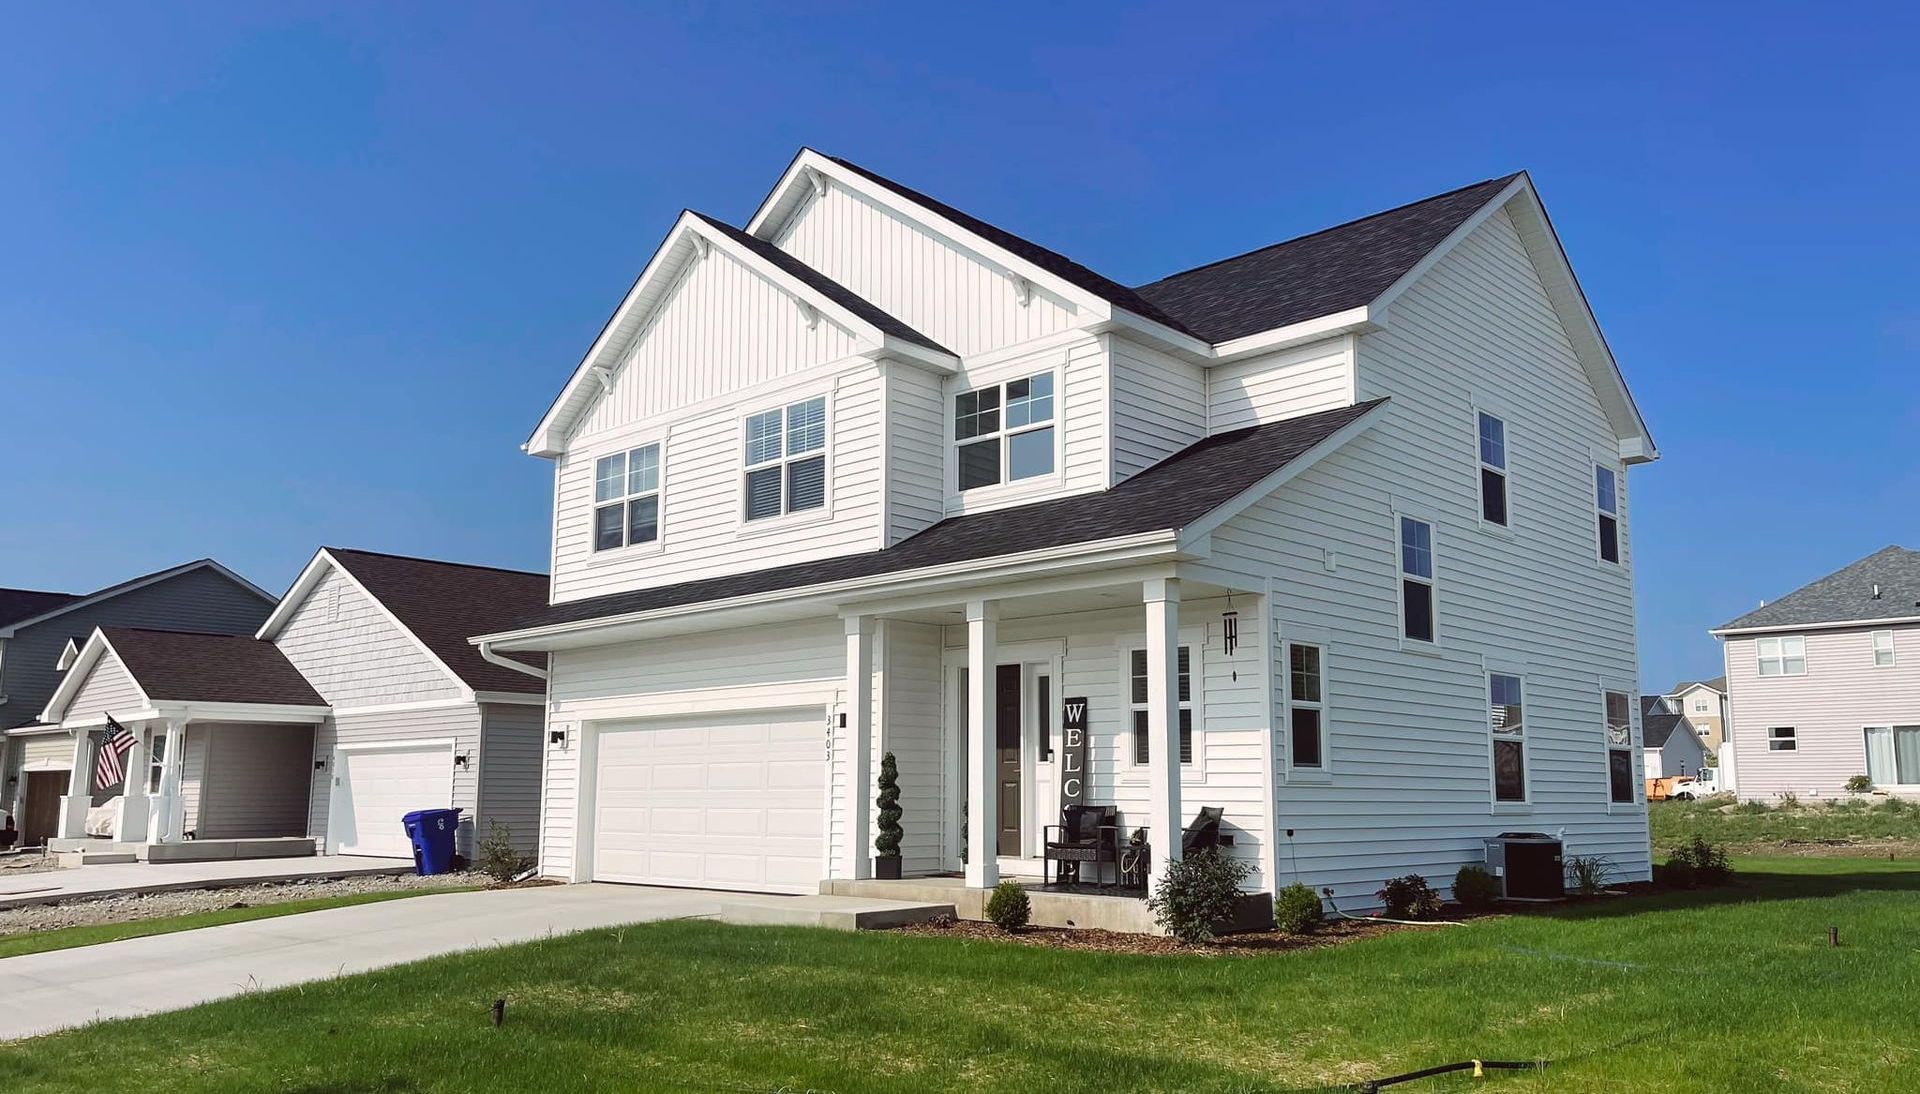 Exterior Shot of a House for Rent - Brookstone Homes in Kenosha, WI